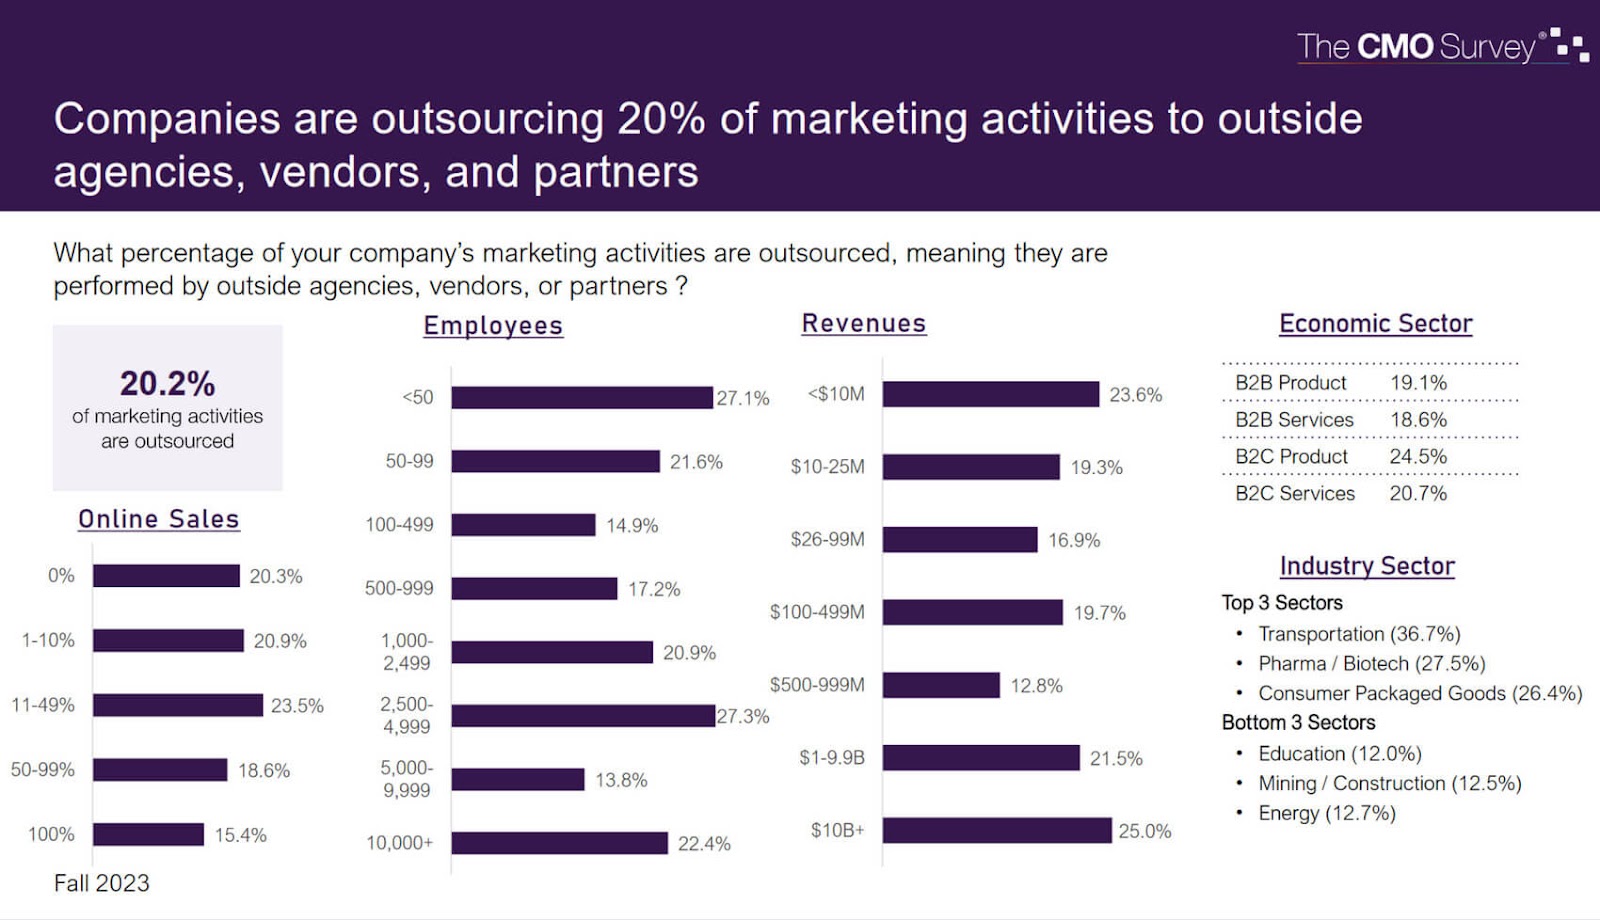 CMO Survey data showing statistics for companies that are outsourcing marketing activities to outside agencies, vendors, and partners